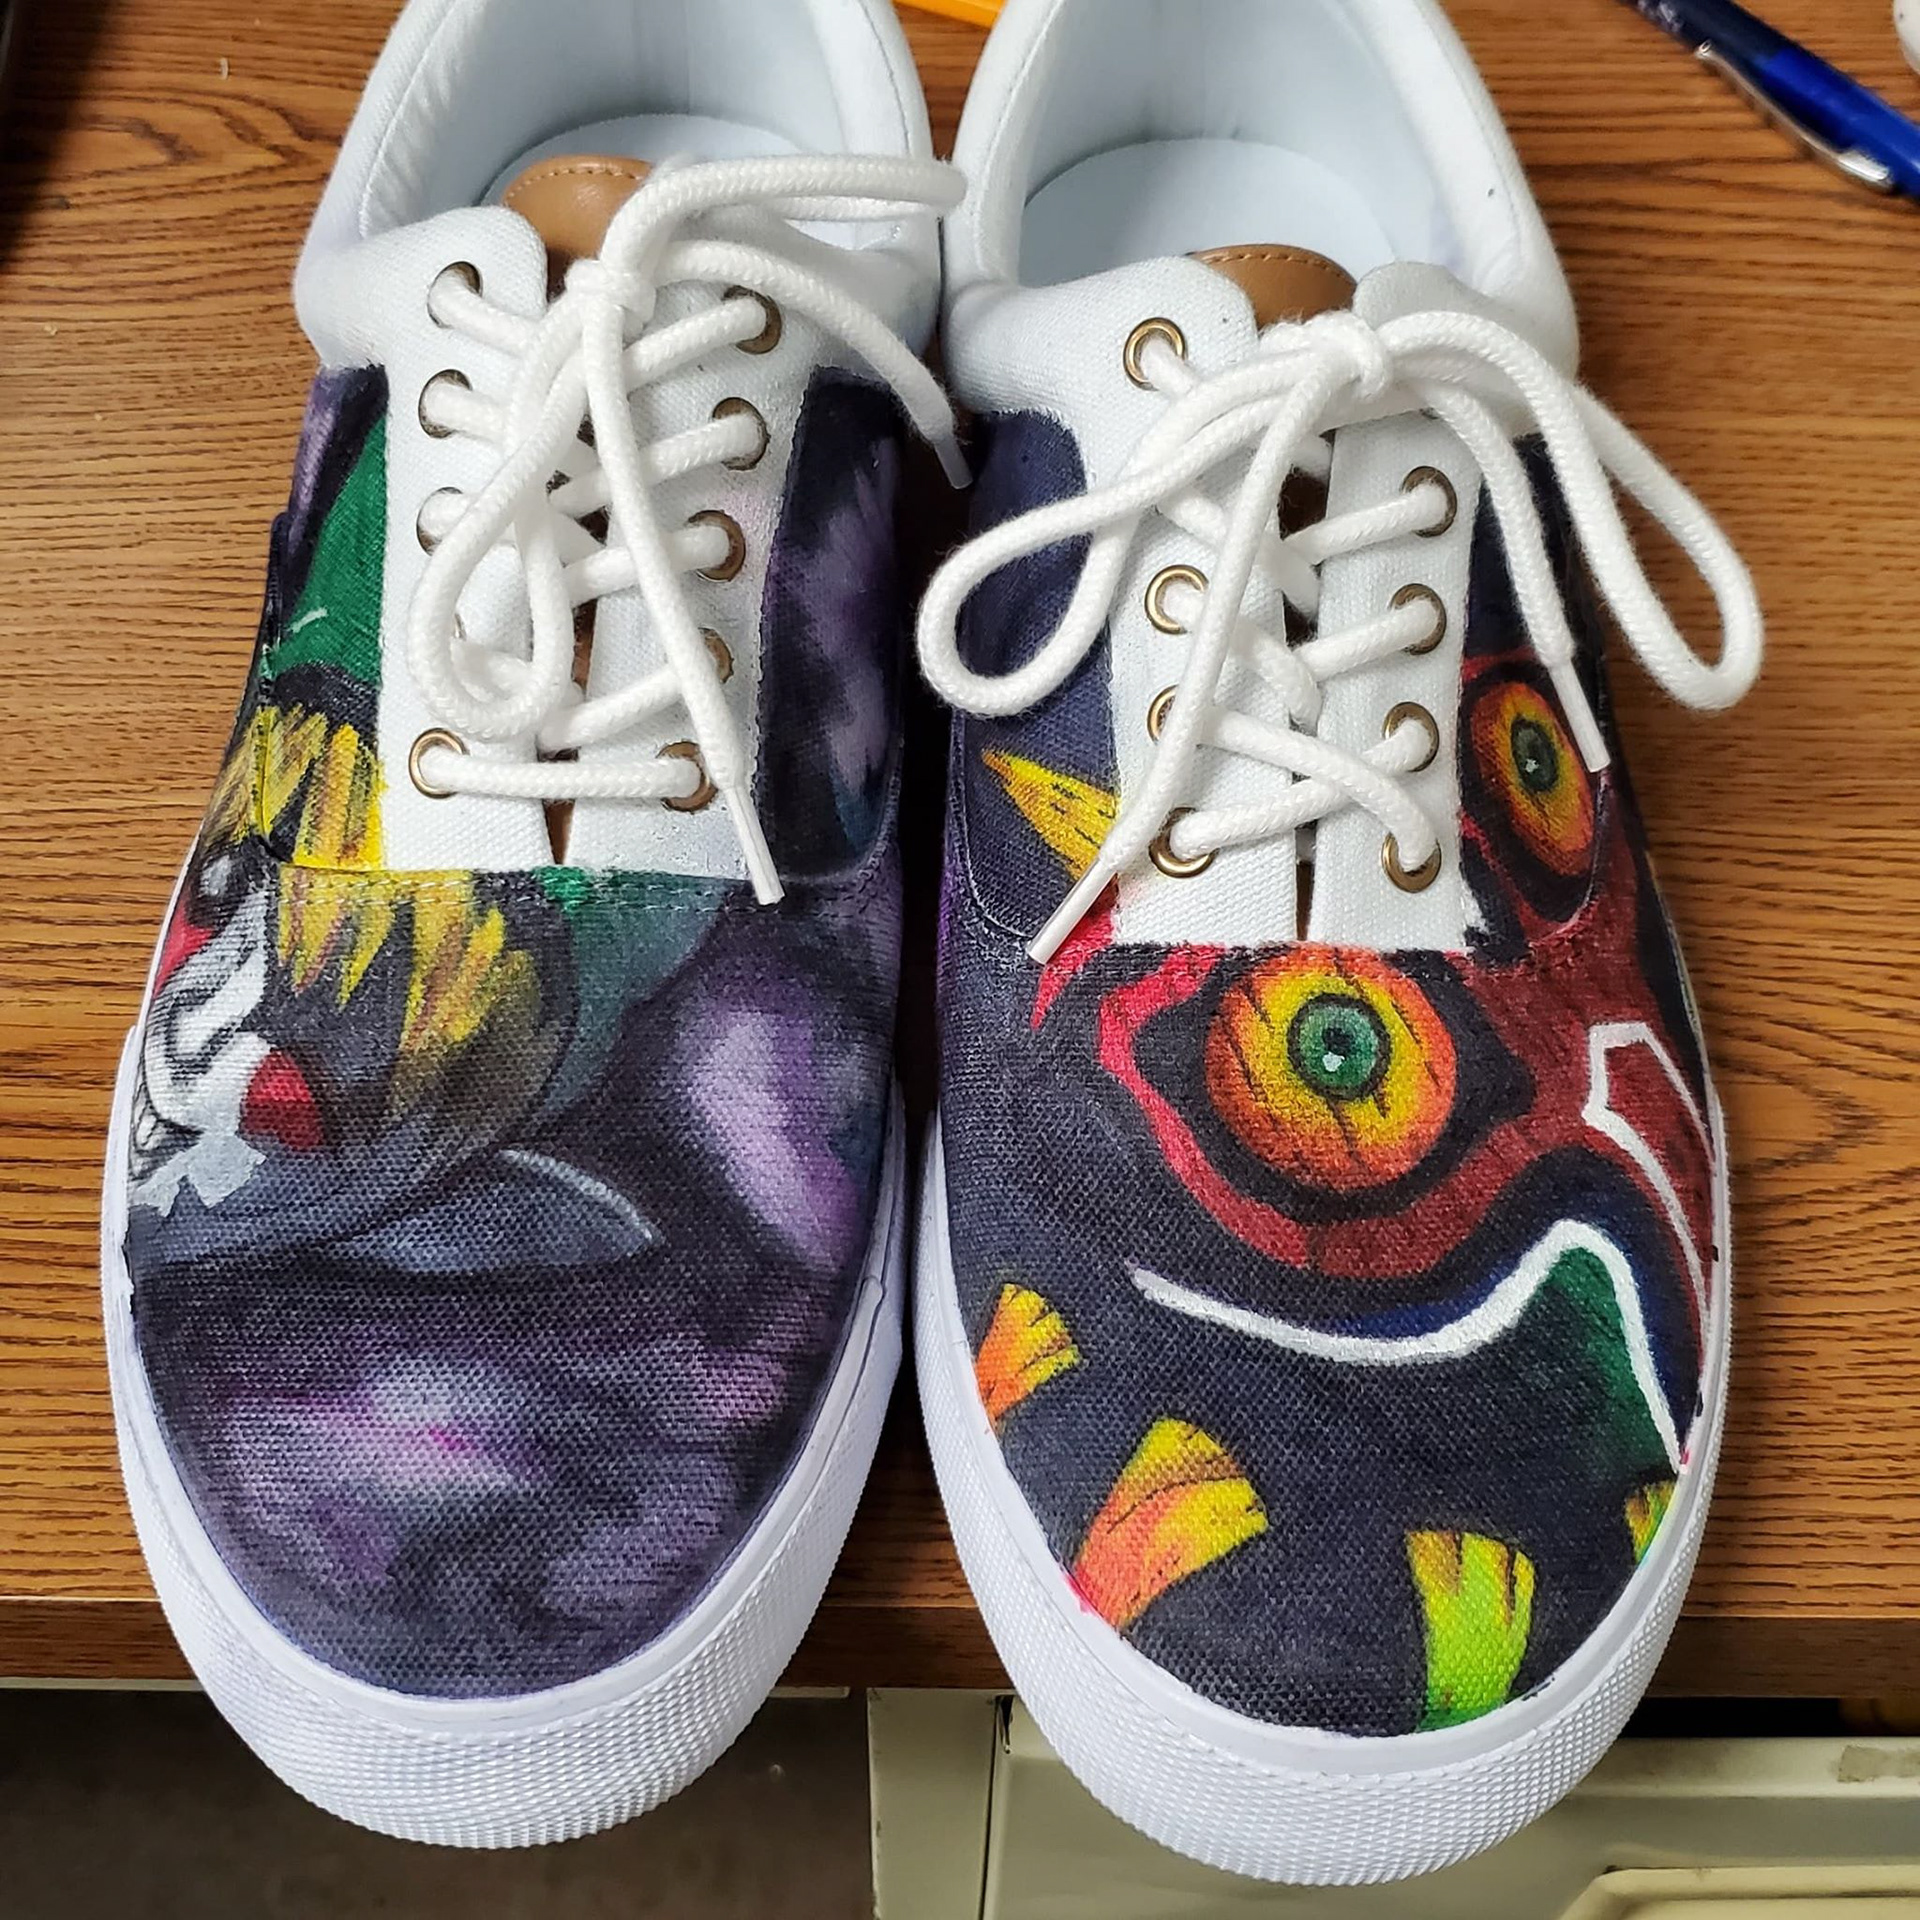 Cheap way to customize shoes, Marker